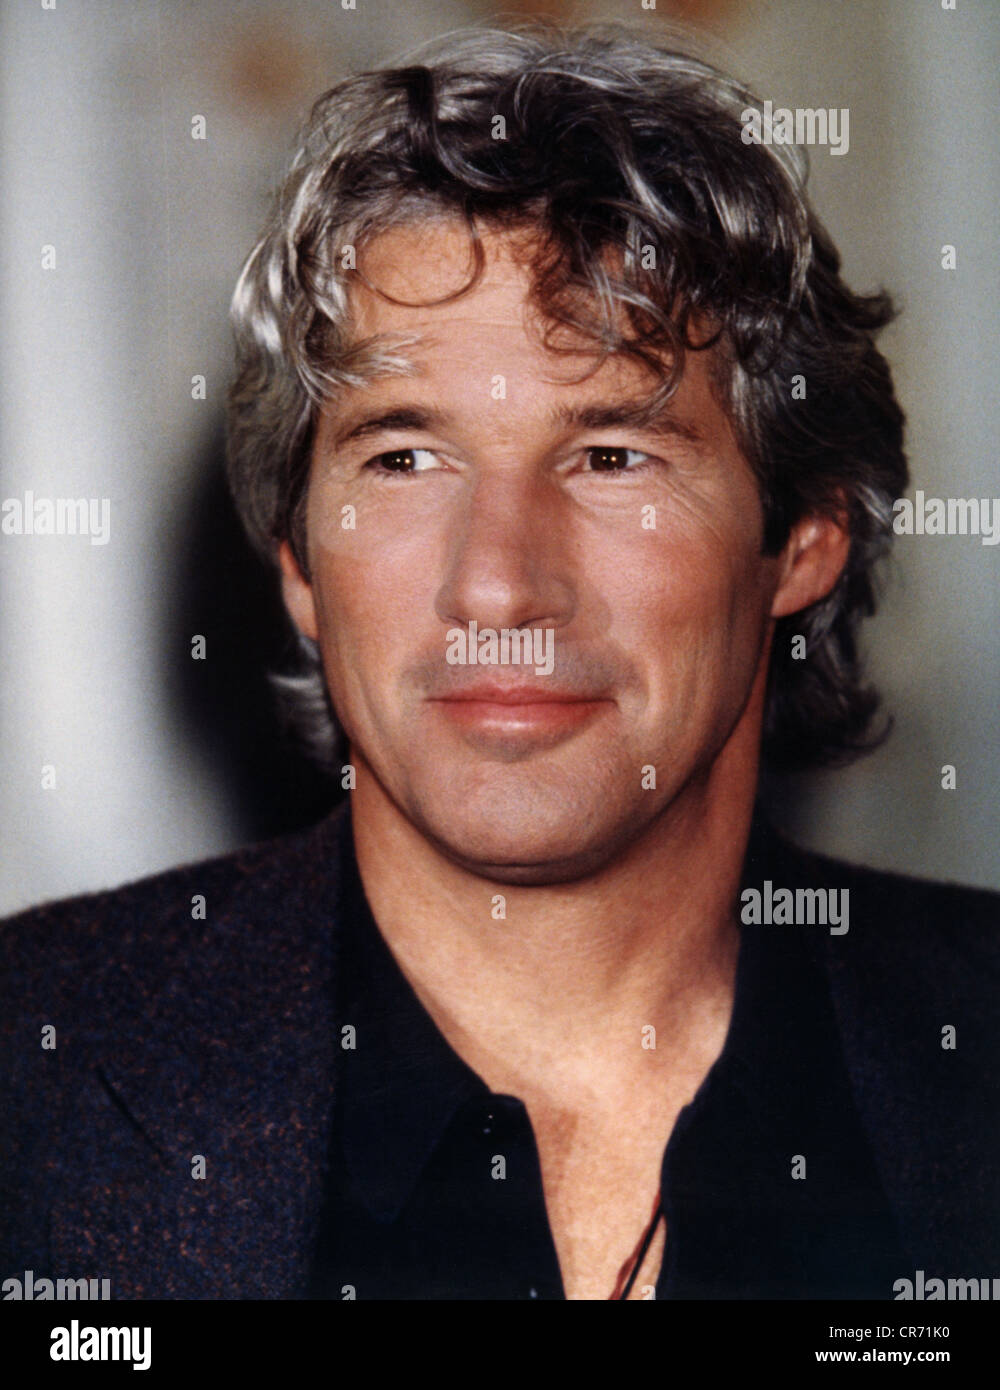 Gere, Richard, * 31.8.1949, US actor, portrait, on the occasion of the release of the movie 'Primal Fear', Hamburg, Germany, 28.5.1996, Stock Photo